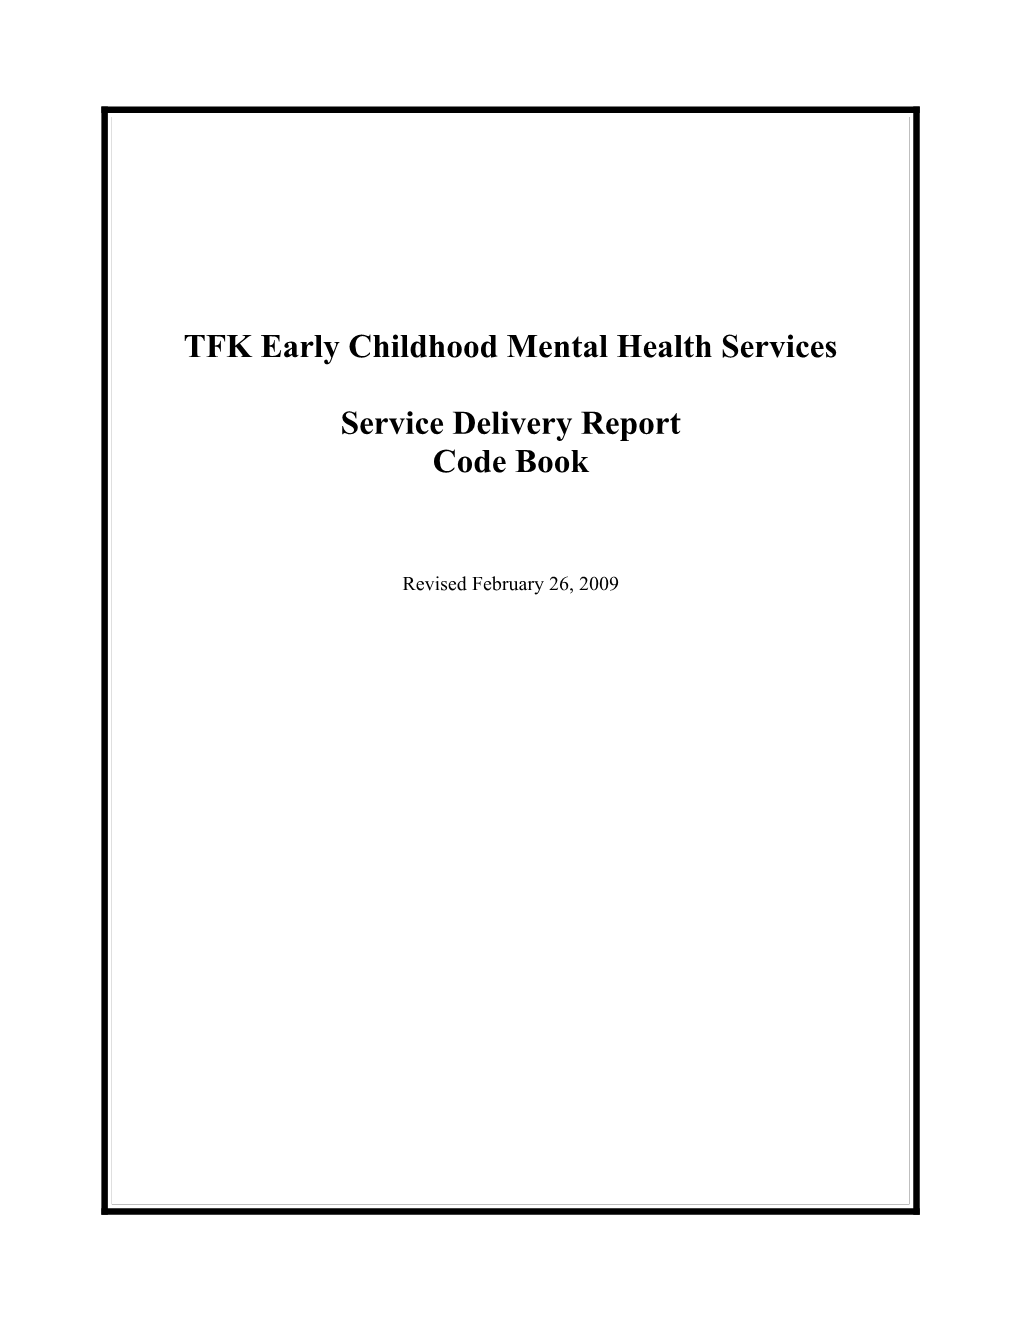 TFK Early Childhood Mental Health Services